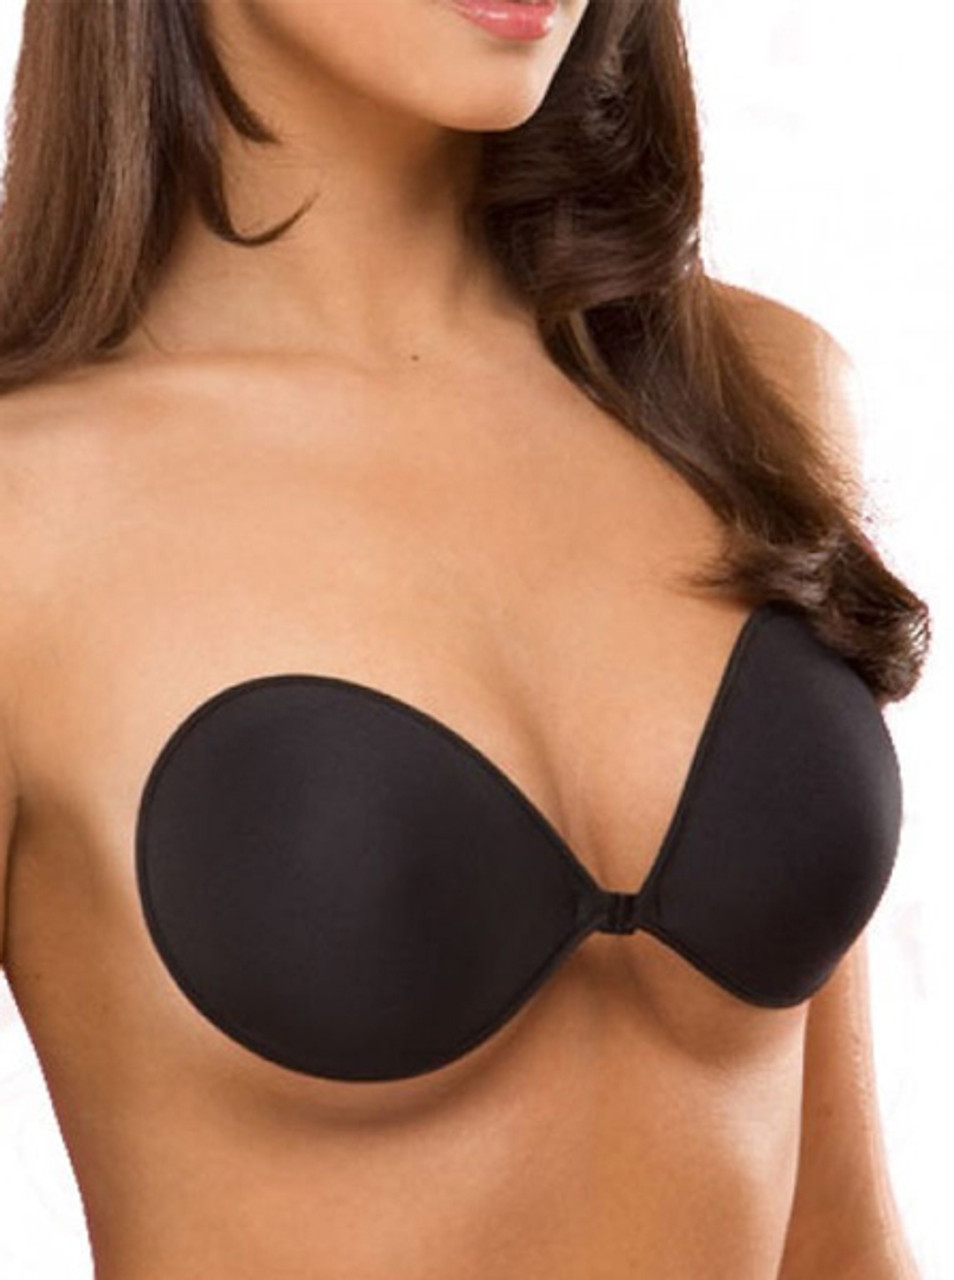 How many bras do you have? - Quora